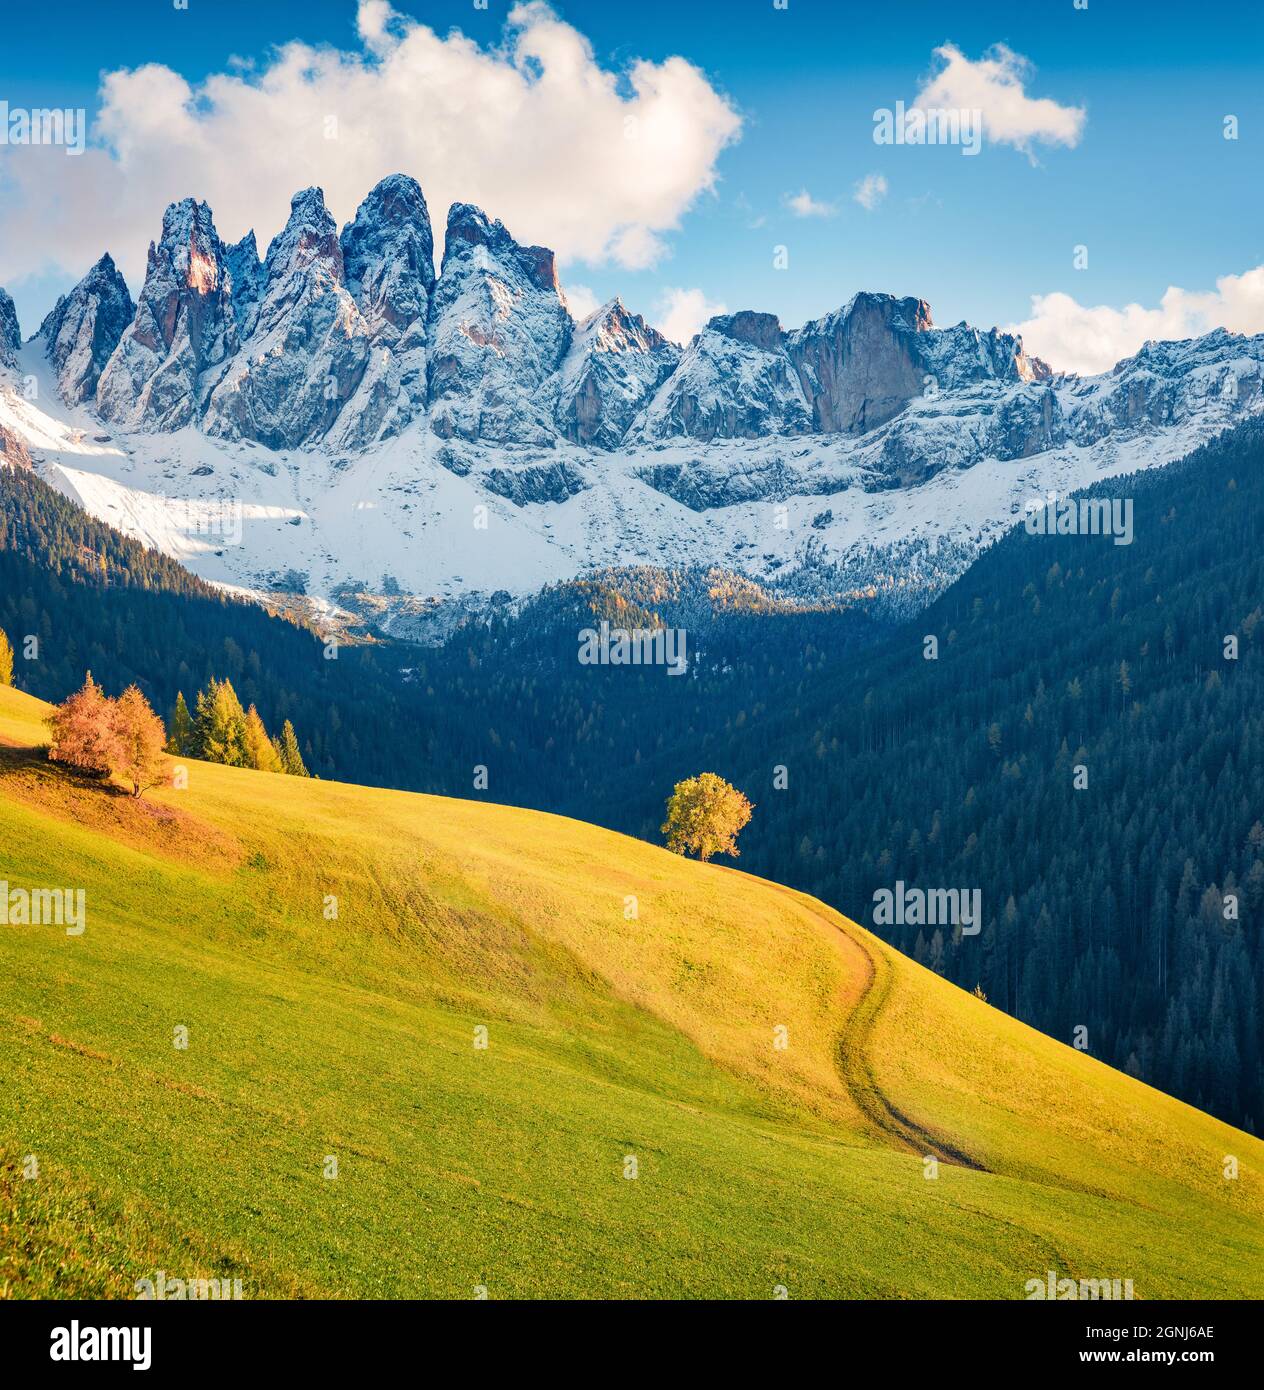 Majestic morning view of Santa Maddalena village hills in front of the Geisler or Odle Dolomites Group. Magnificent autumn scene of Dolomite Alps, Ita Stock Photo